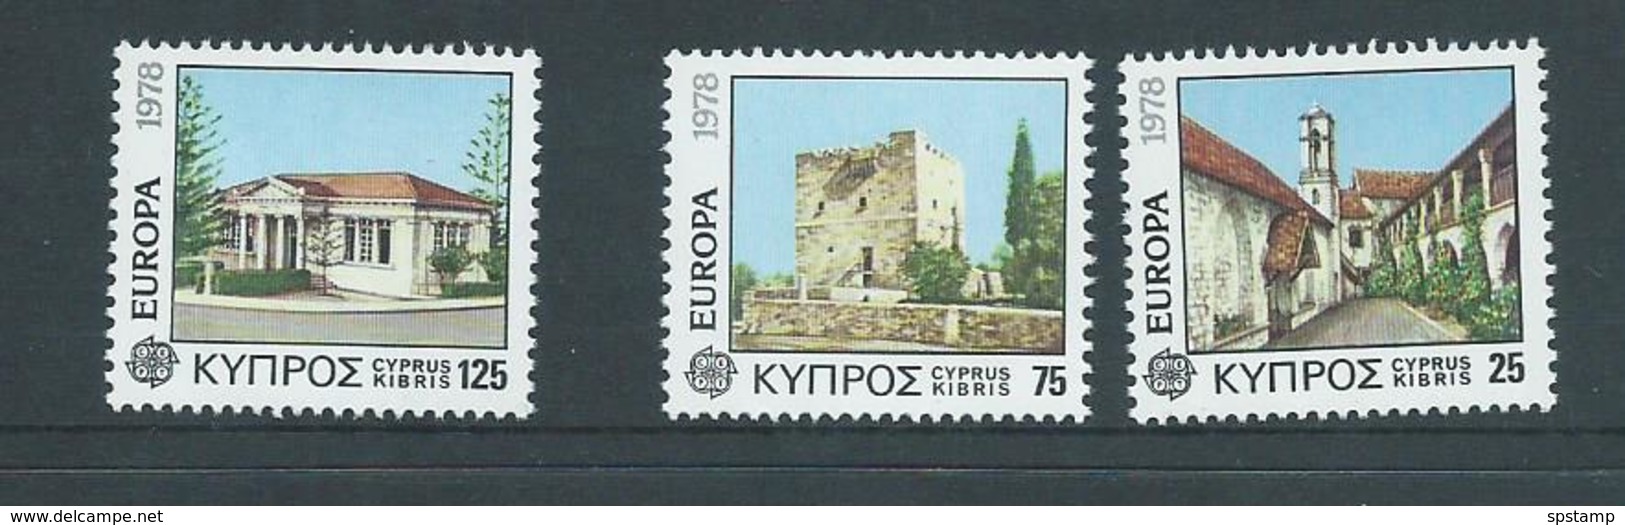 Cyprus 1978 Europa Architecture Set 3 MNH - Unused Stamps